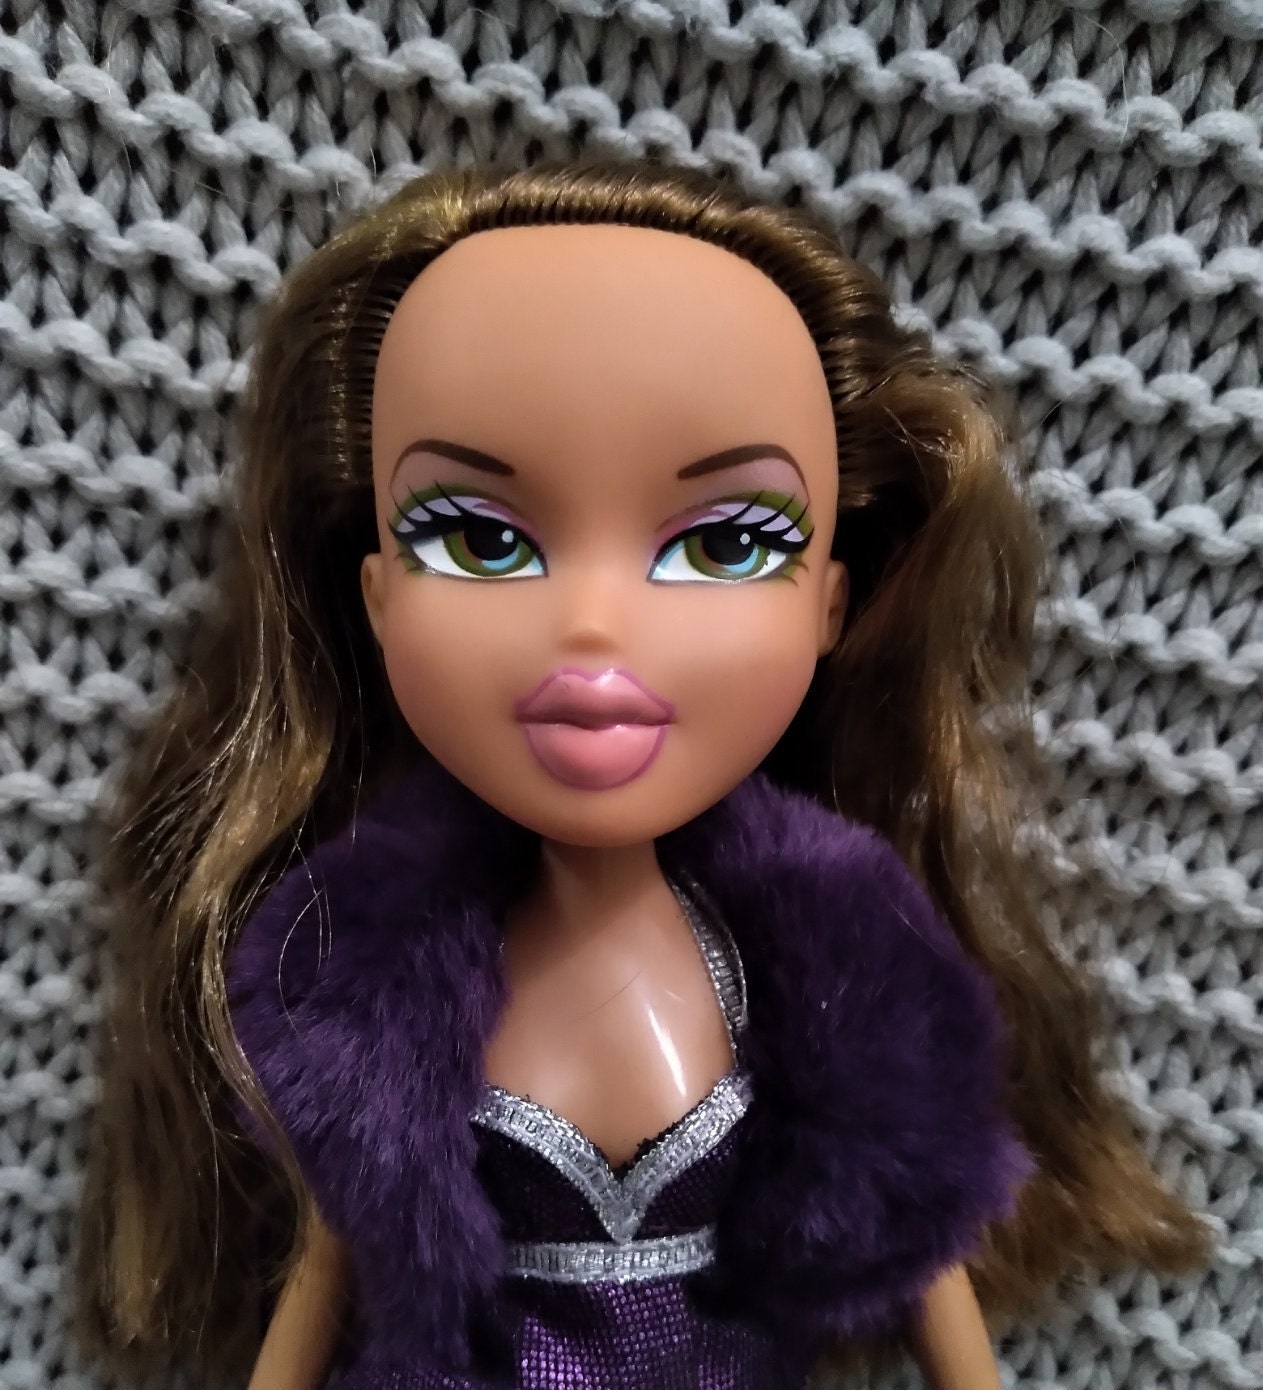 Vintage MGA Bratz Yasmin in Purple and Silver Halter Top, Fur Stole, Black  Pleather Pants and With Star Brush 